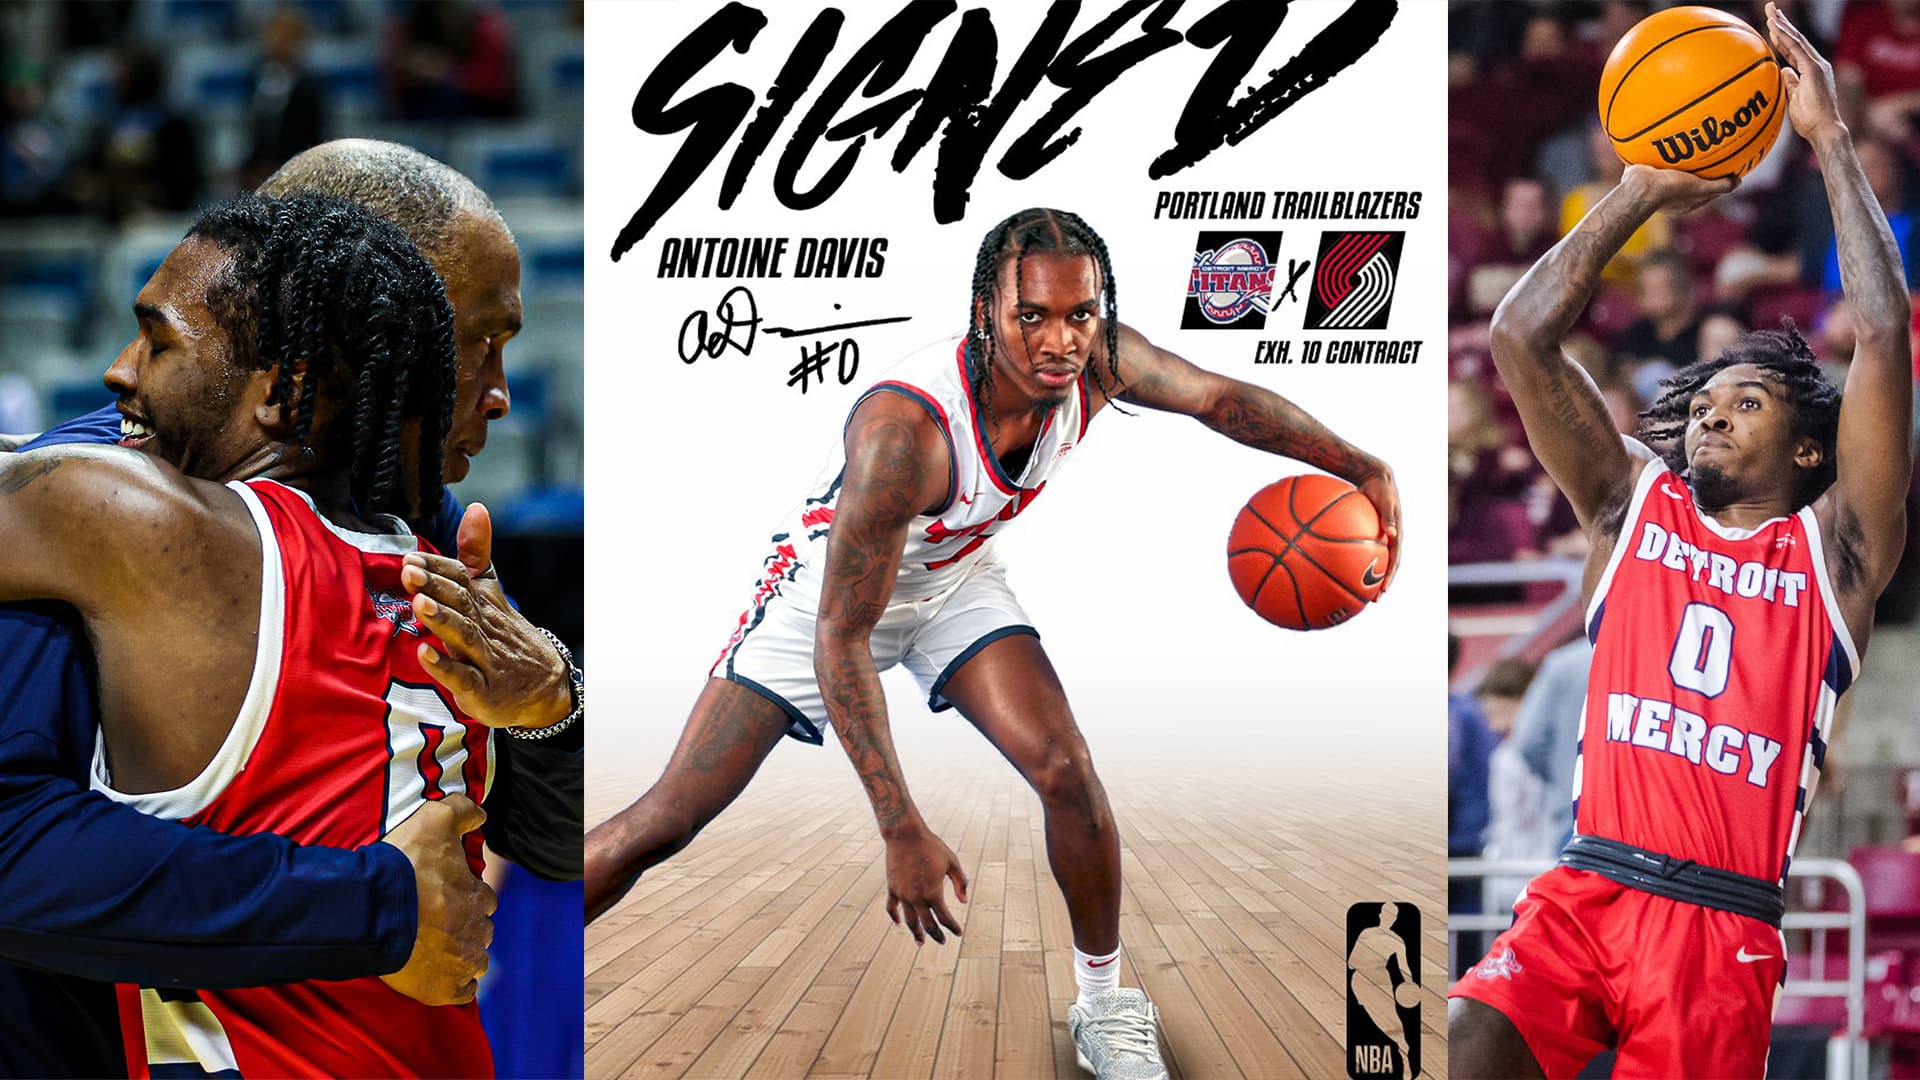 A graphic features Antoine Davis dribbling a basketball on a court. Text reads, Signed, Antoine Davis, Portland Trail Blazers, Exh. 10 Contract. Logos on the graphic feature Detroit Mercy Titans, Portland Trail Blazers and NBA. Photos on the left and right of the graphic also are of Davis, one hugging his father and the other shooting a basketball and wearing a red No. 0 Detroit Mercy jersey.